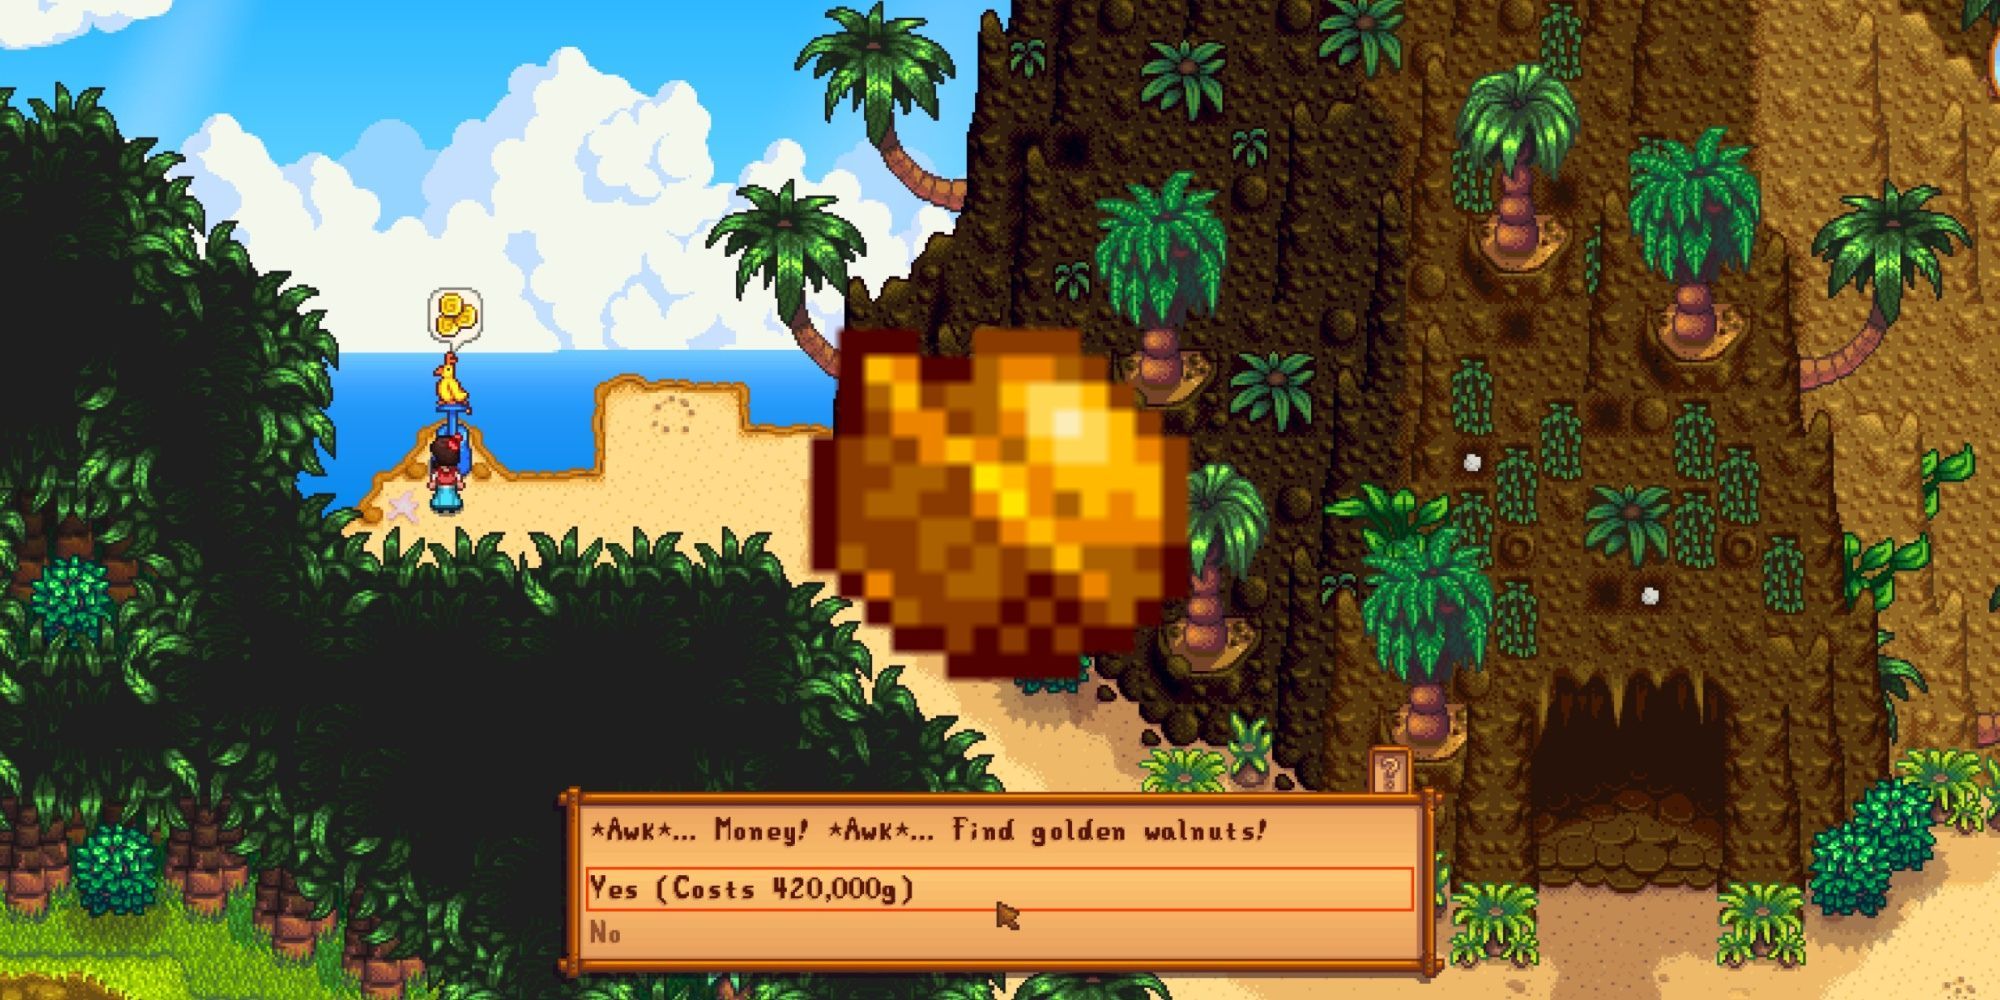 Stardew Valley: An image of the player standing in front of the Joja Parrot with a Golden Walnut over the entire image